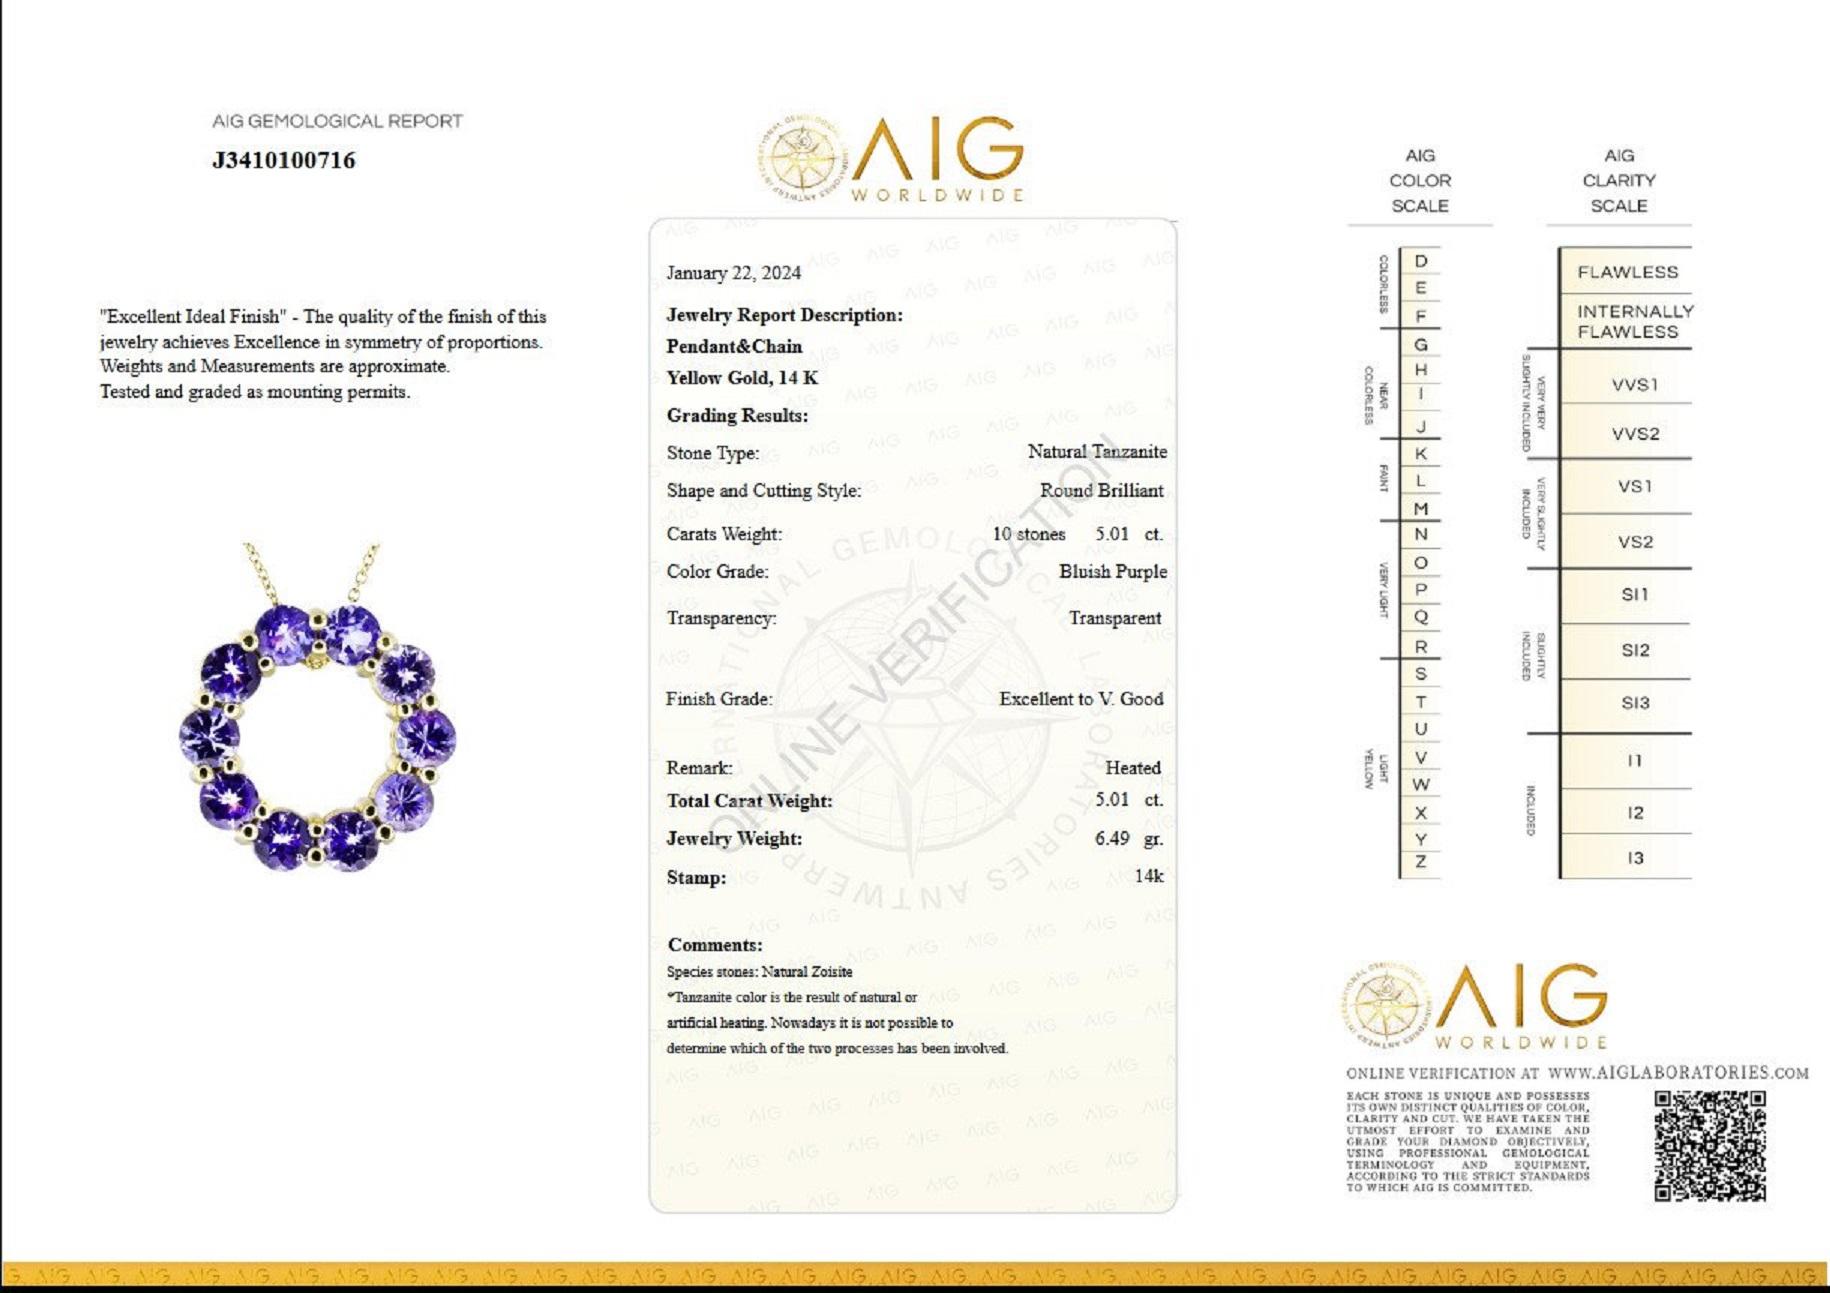 Center Tanzanite Stone:
Weight: 5.01 carat / 10 stones
Color: Bluish Purple
Shape: Round Brilliant

Length: 45 cm necklace + 2 cm pendant

Item ships from Israeli Diamonds Exchange, customers are responsible for any local customs or VAT fees that